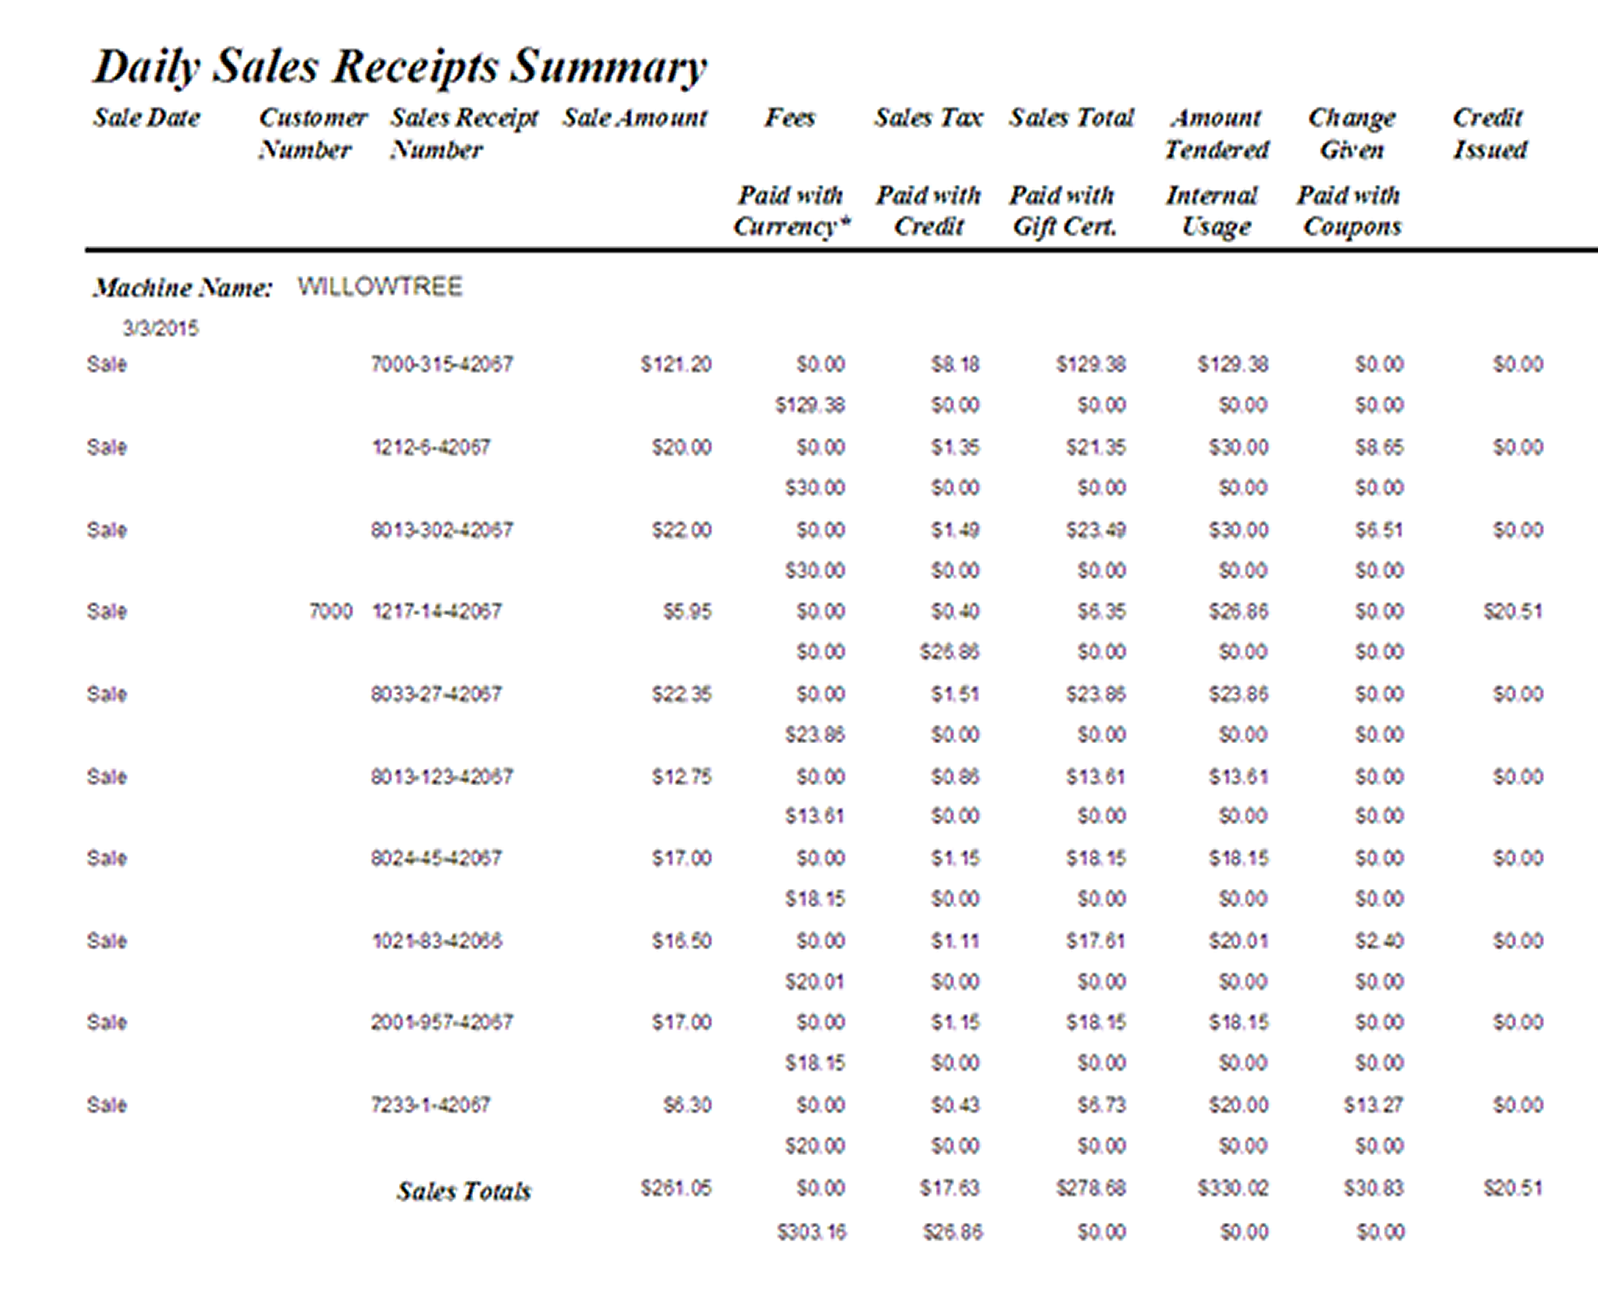 Example Daily Sales Receipts Report